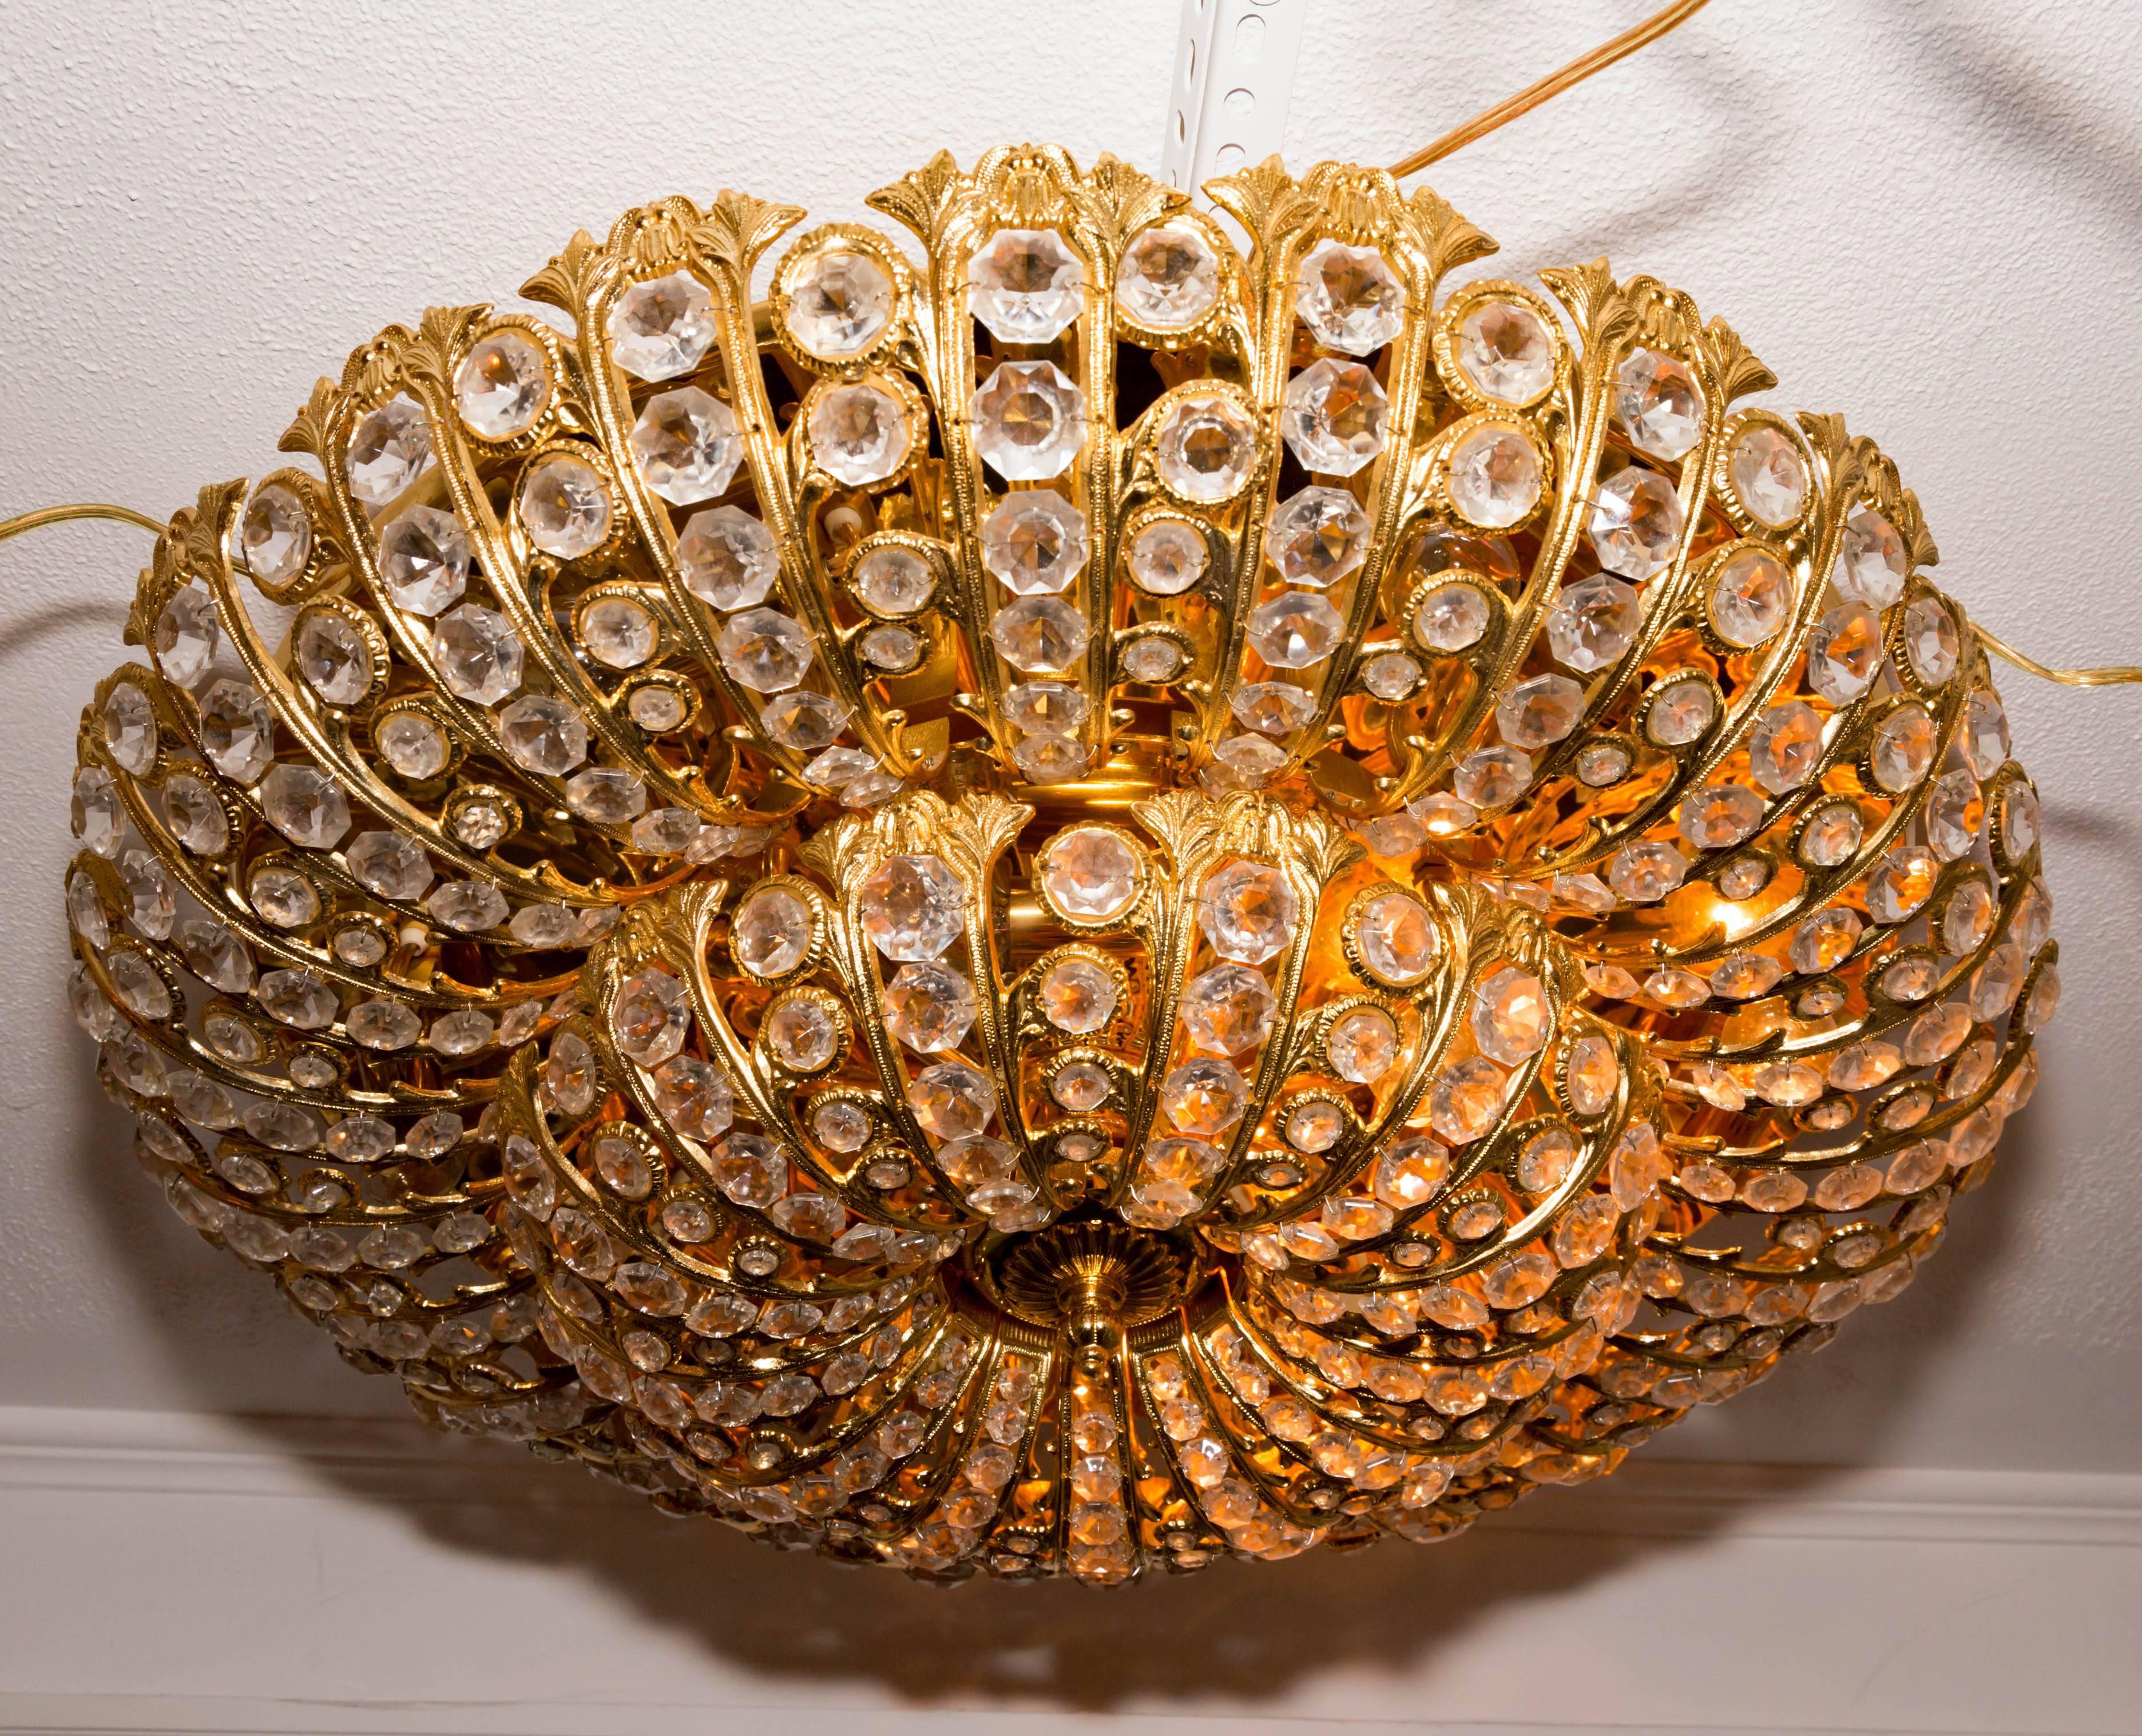 20th Century Dome Form Gilt Metal Flush Mount Fixture with Inset Crystal Elements For Sale